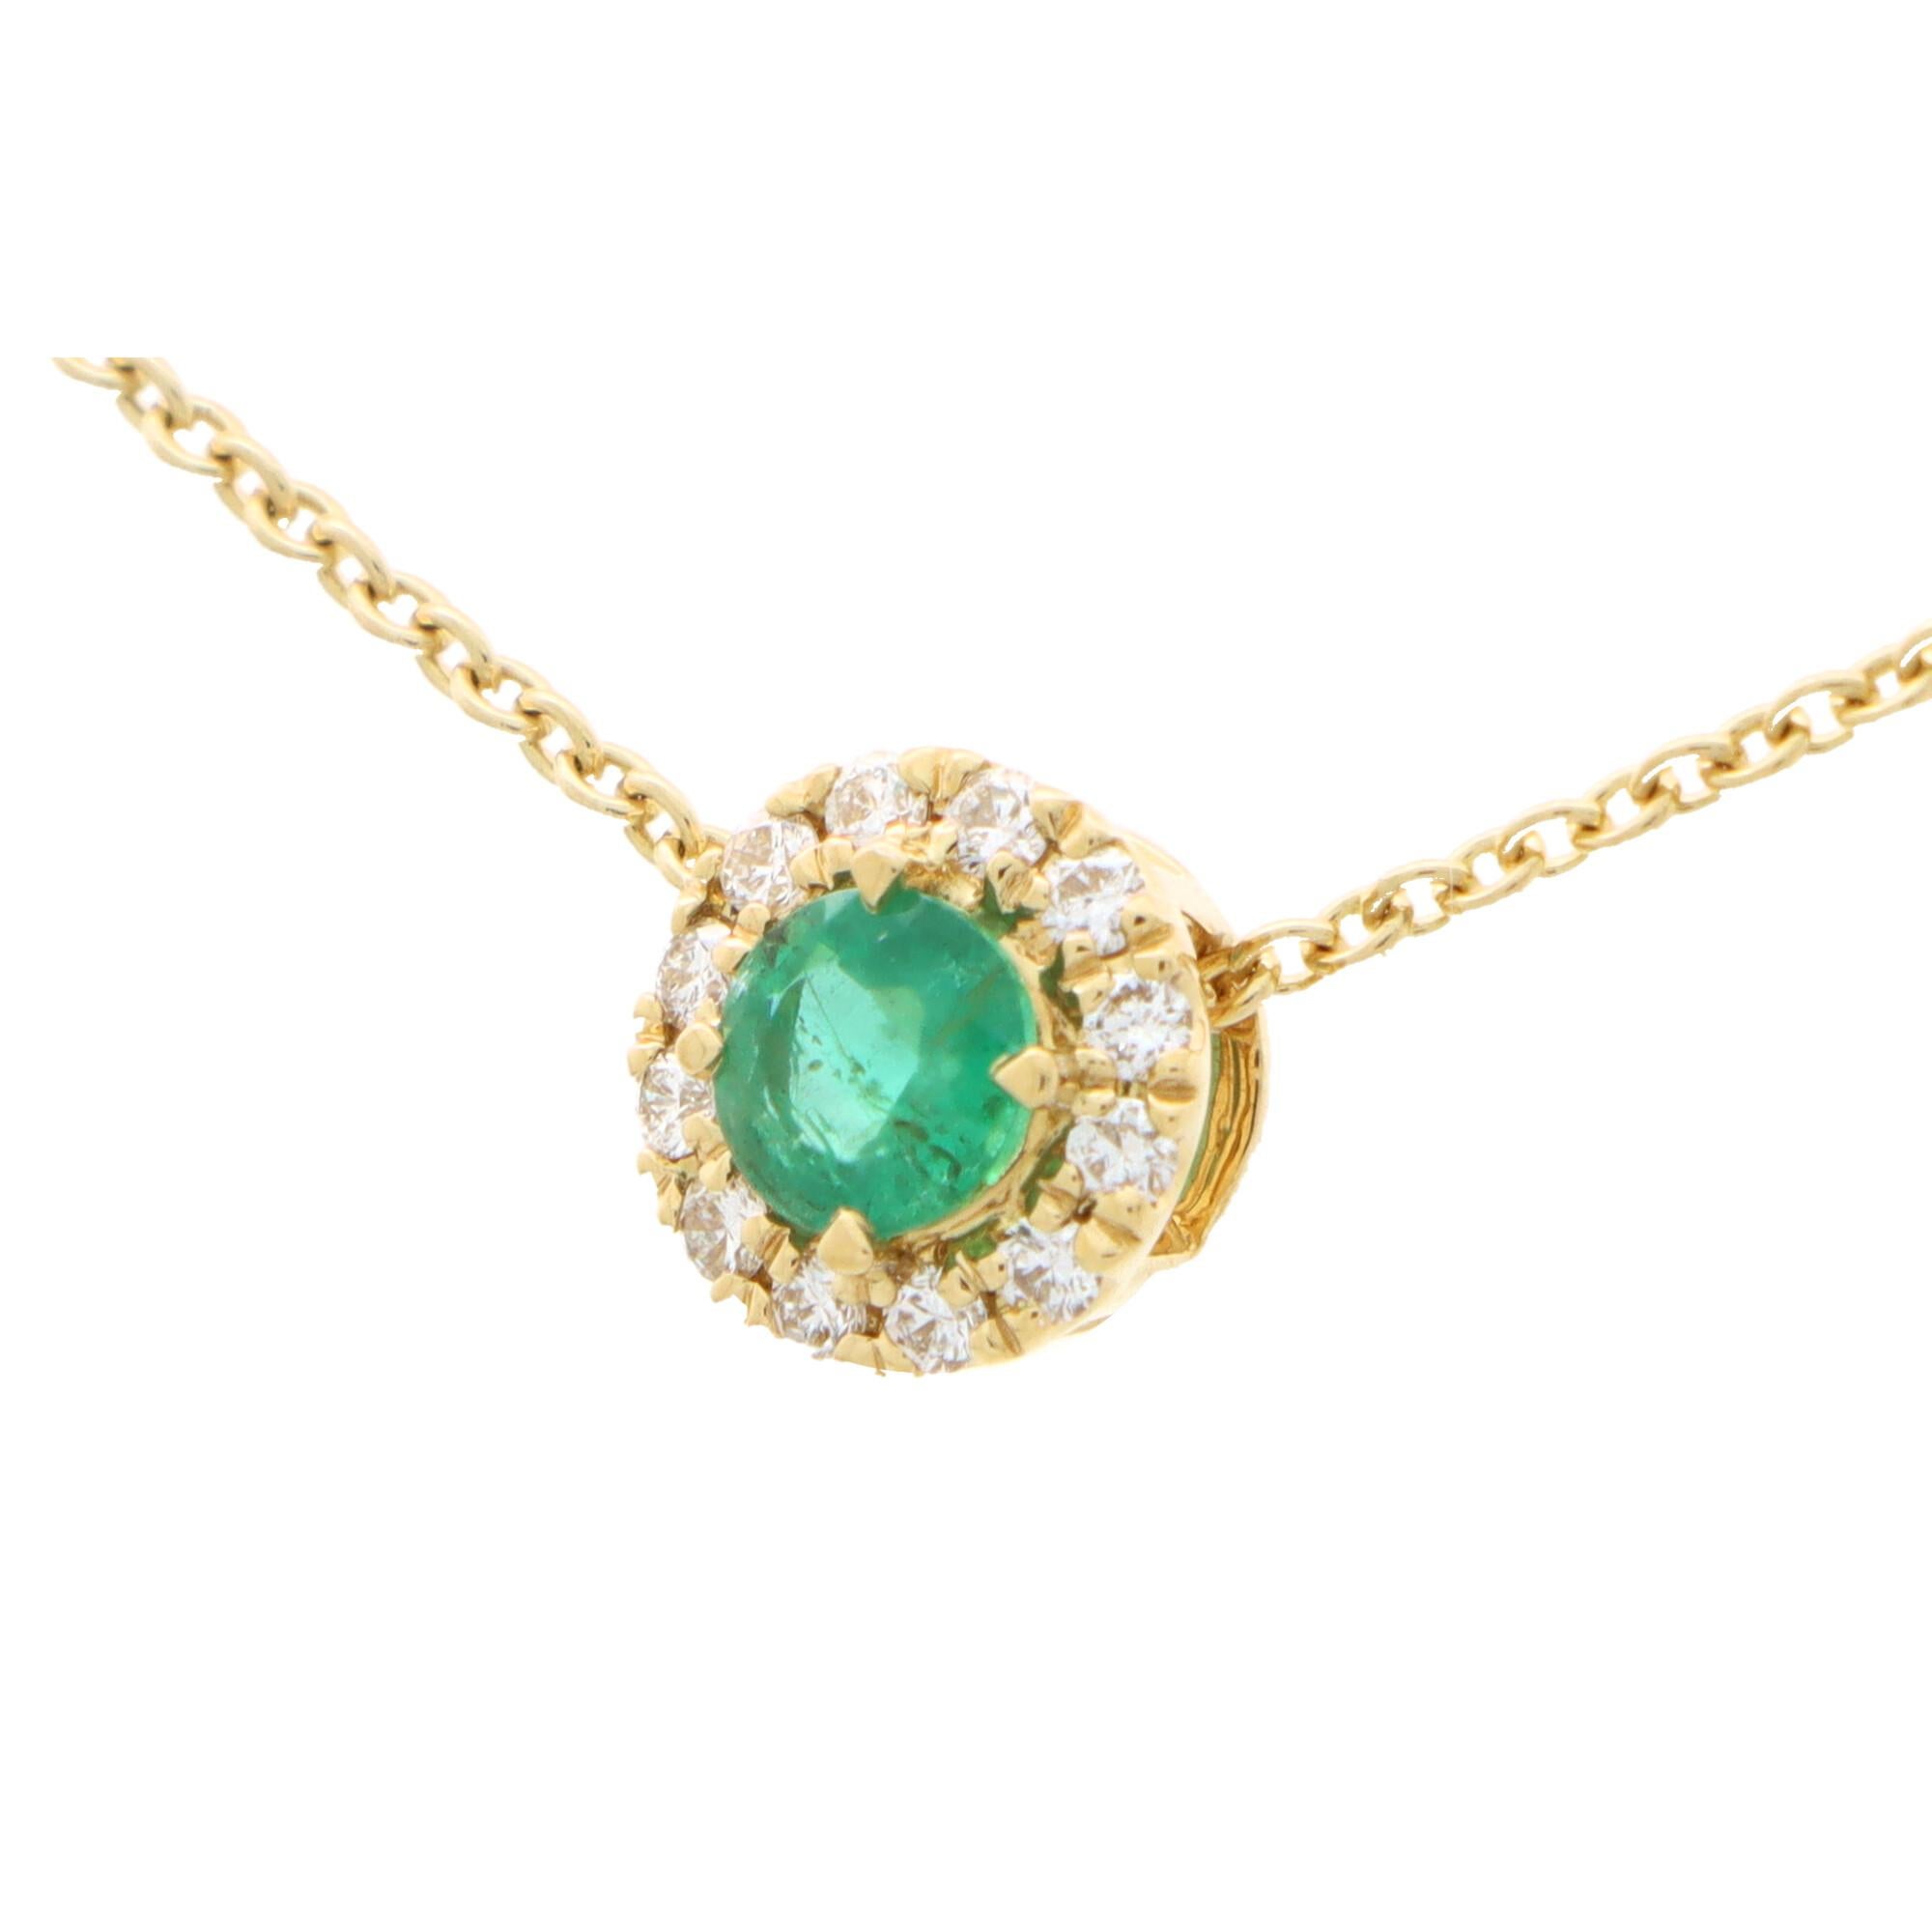 A beautiful emerald and diamond cluster pendant set in 18k yellow gold.

The pendant is centrally set with a vibrant green coloured round cut emerald which is surrounded by 12 sparkly round brilliant cut diamonds. The pendant hangs from a 9k yellow